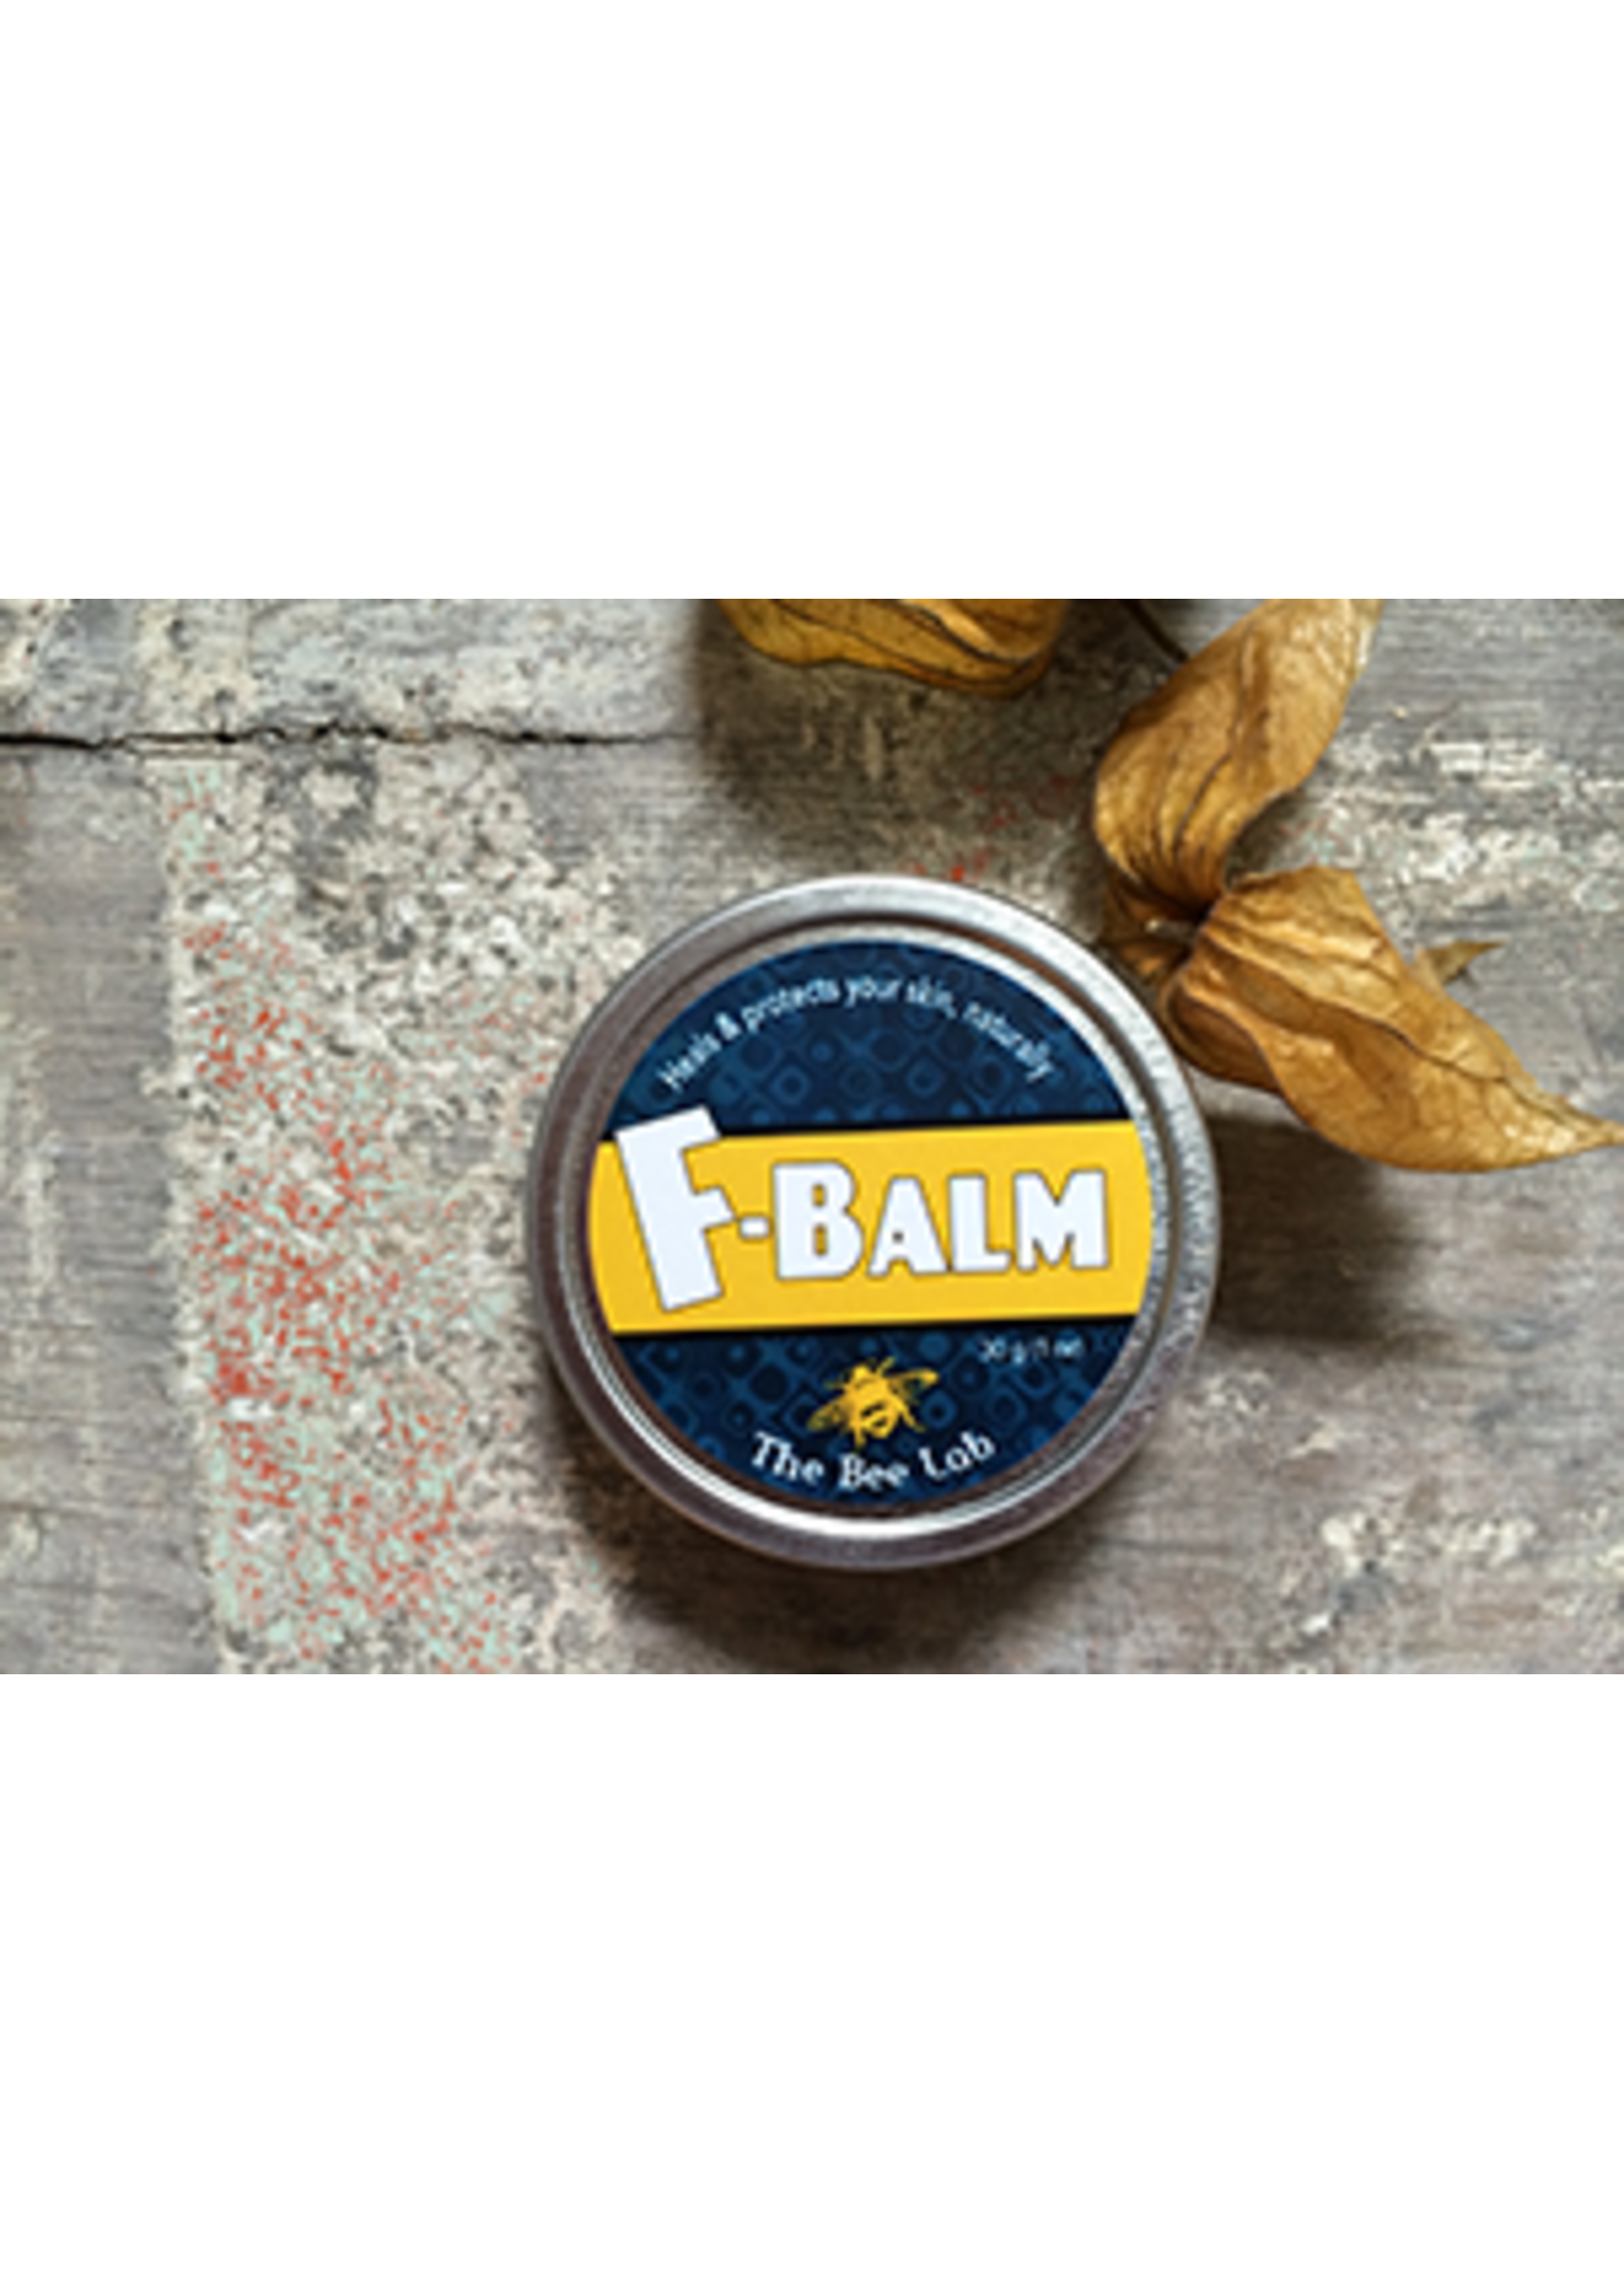 The Bee Lab F-Balm 15 g Scented